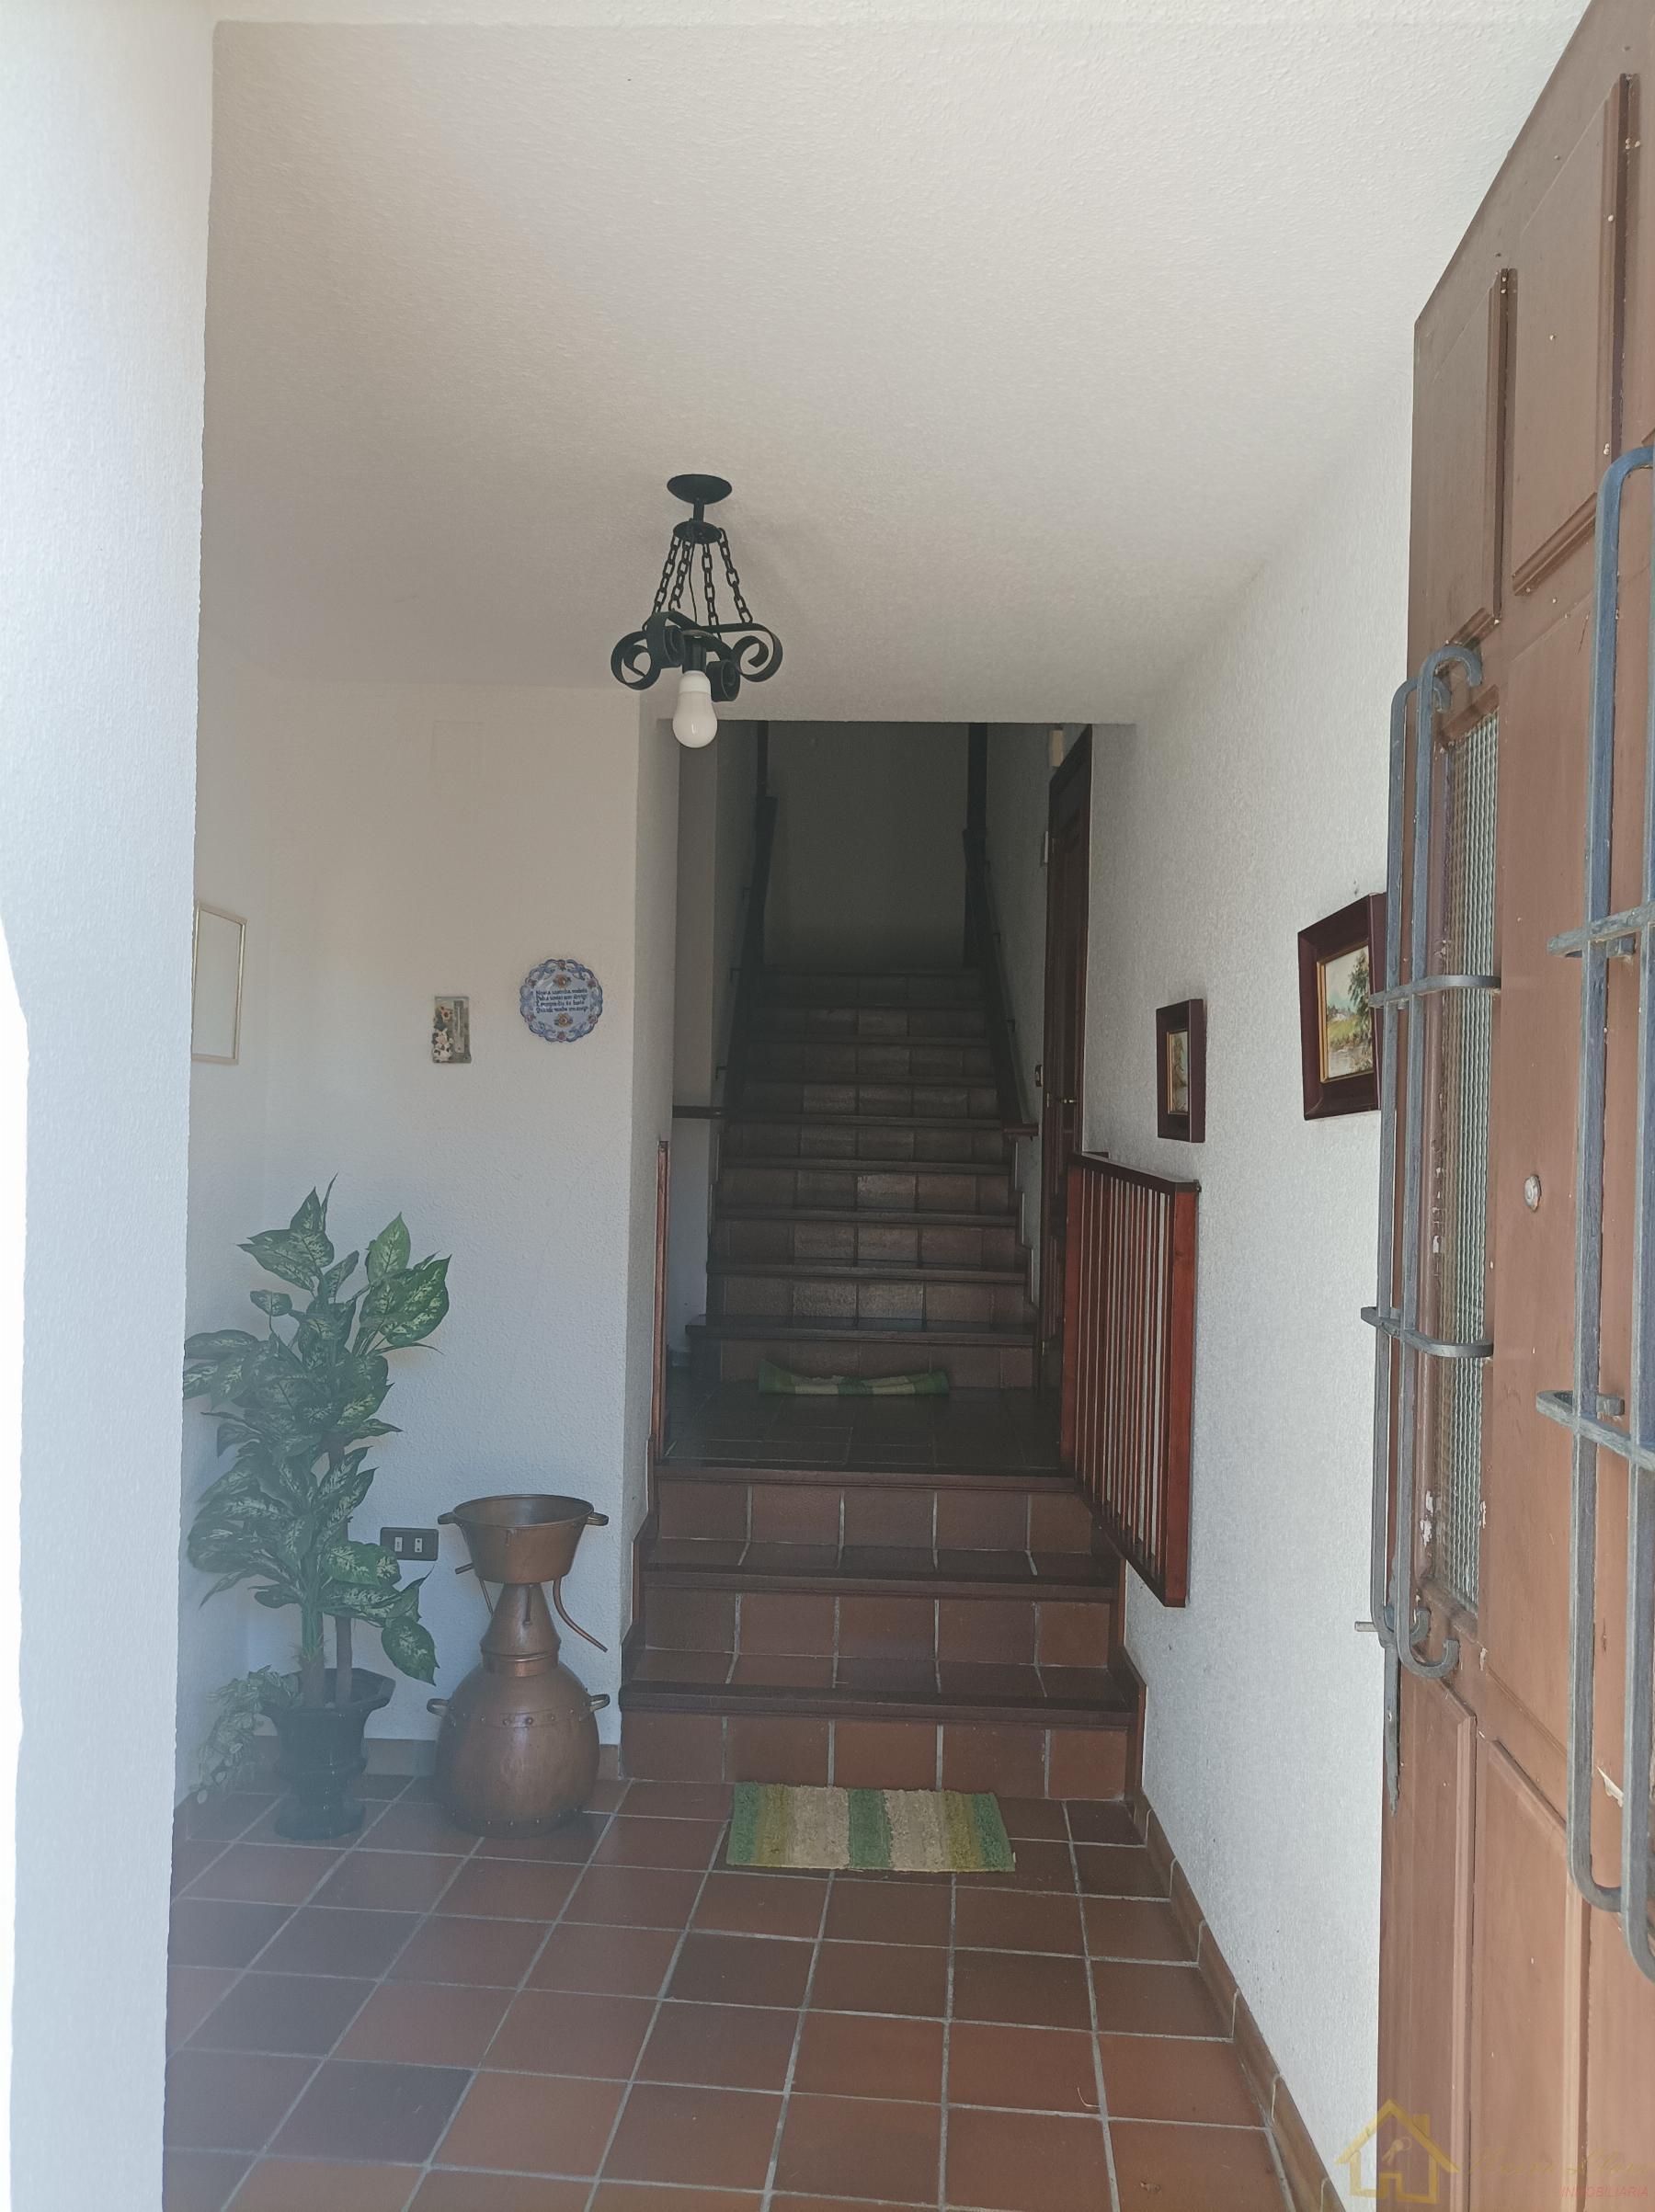 Entry/Exit